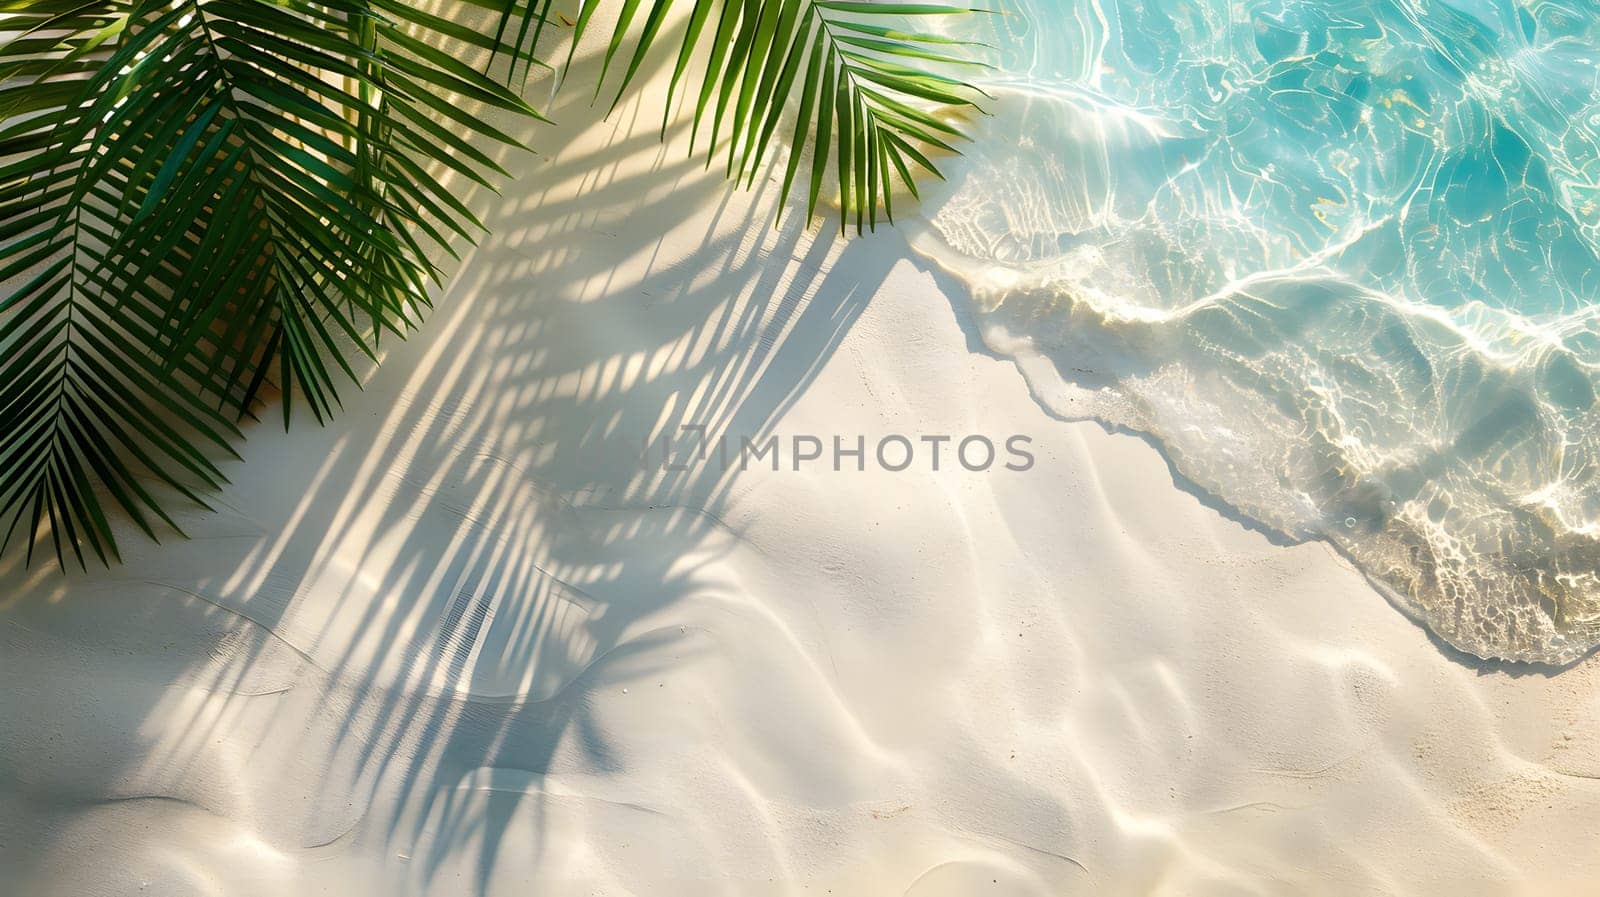 The silhouette of a palm tree is reflected on the sandy beach, creating a beautiful pattern in the landscape. The trees evergreen leaves contrast against the electric blue sky